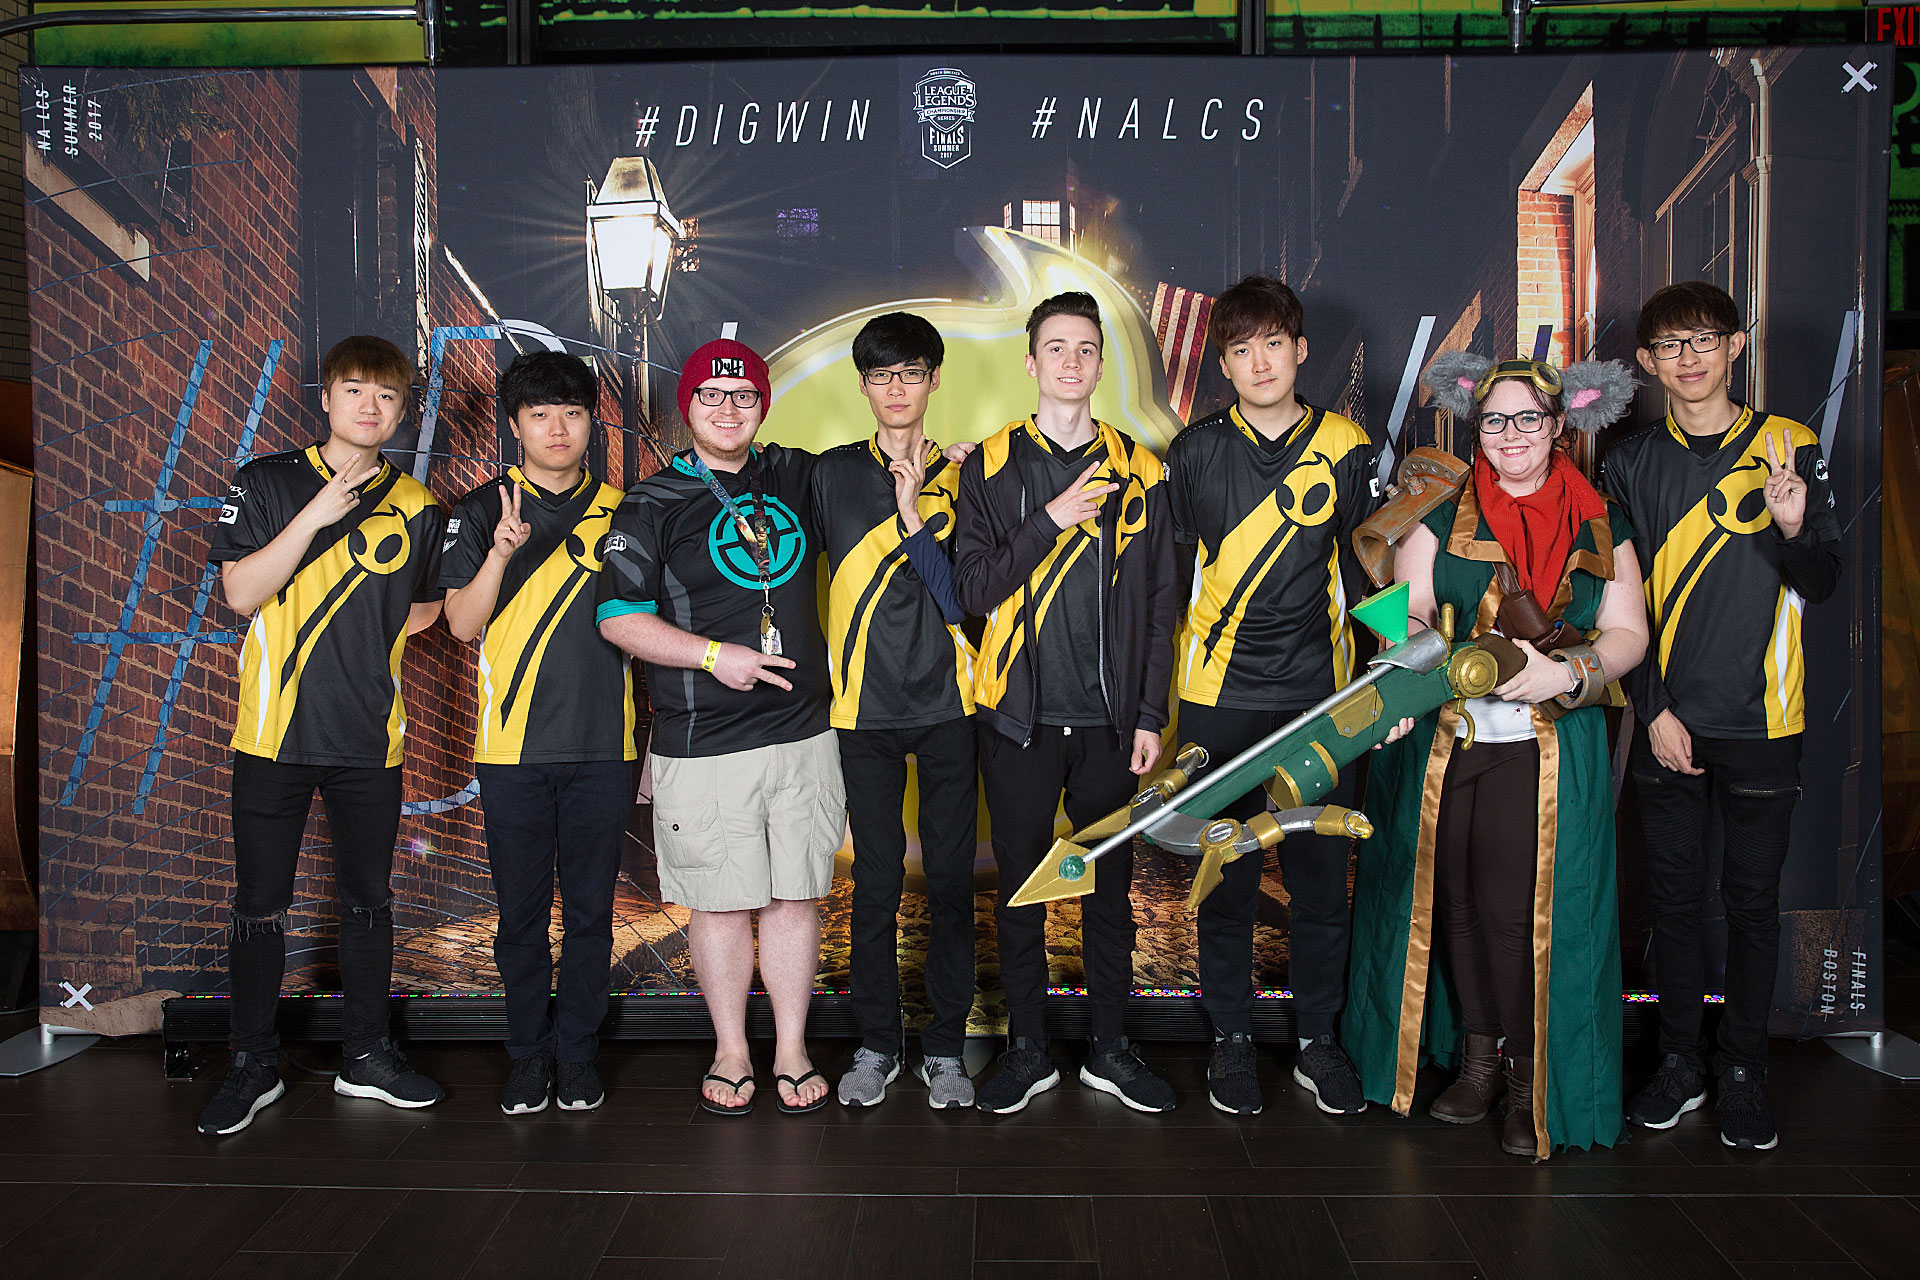 Riot Games League of Legends Photo Station at Legends in TD Garden with Fans